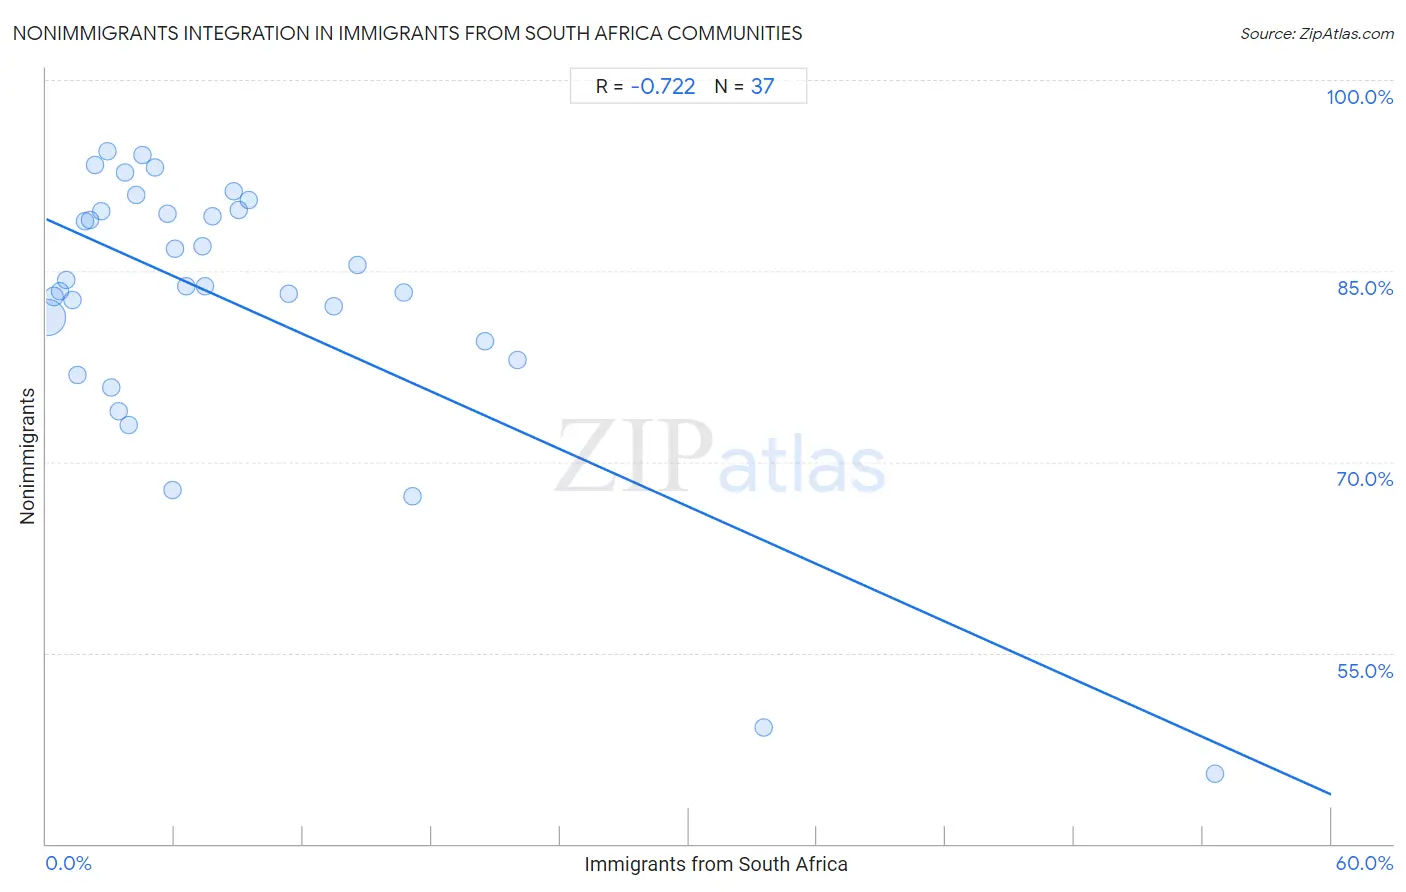 Immigrants from South Africa Integration in Nonimmigrants Communities